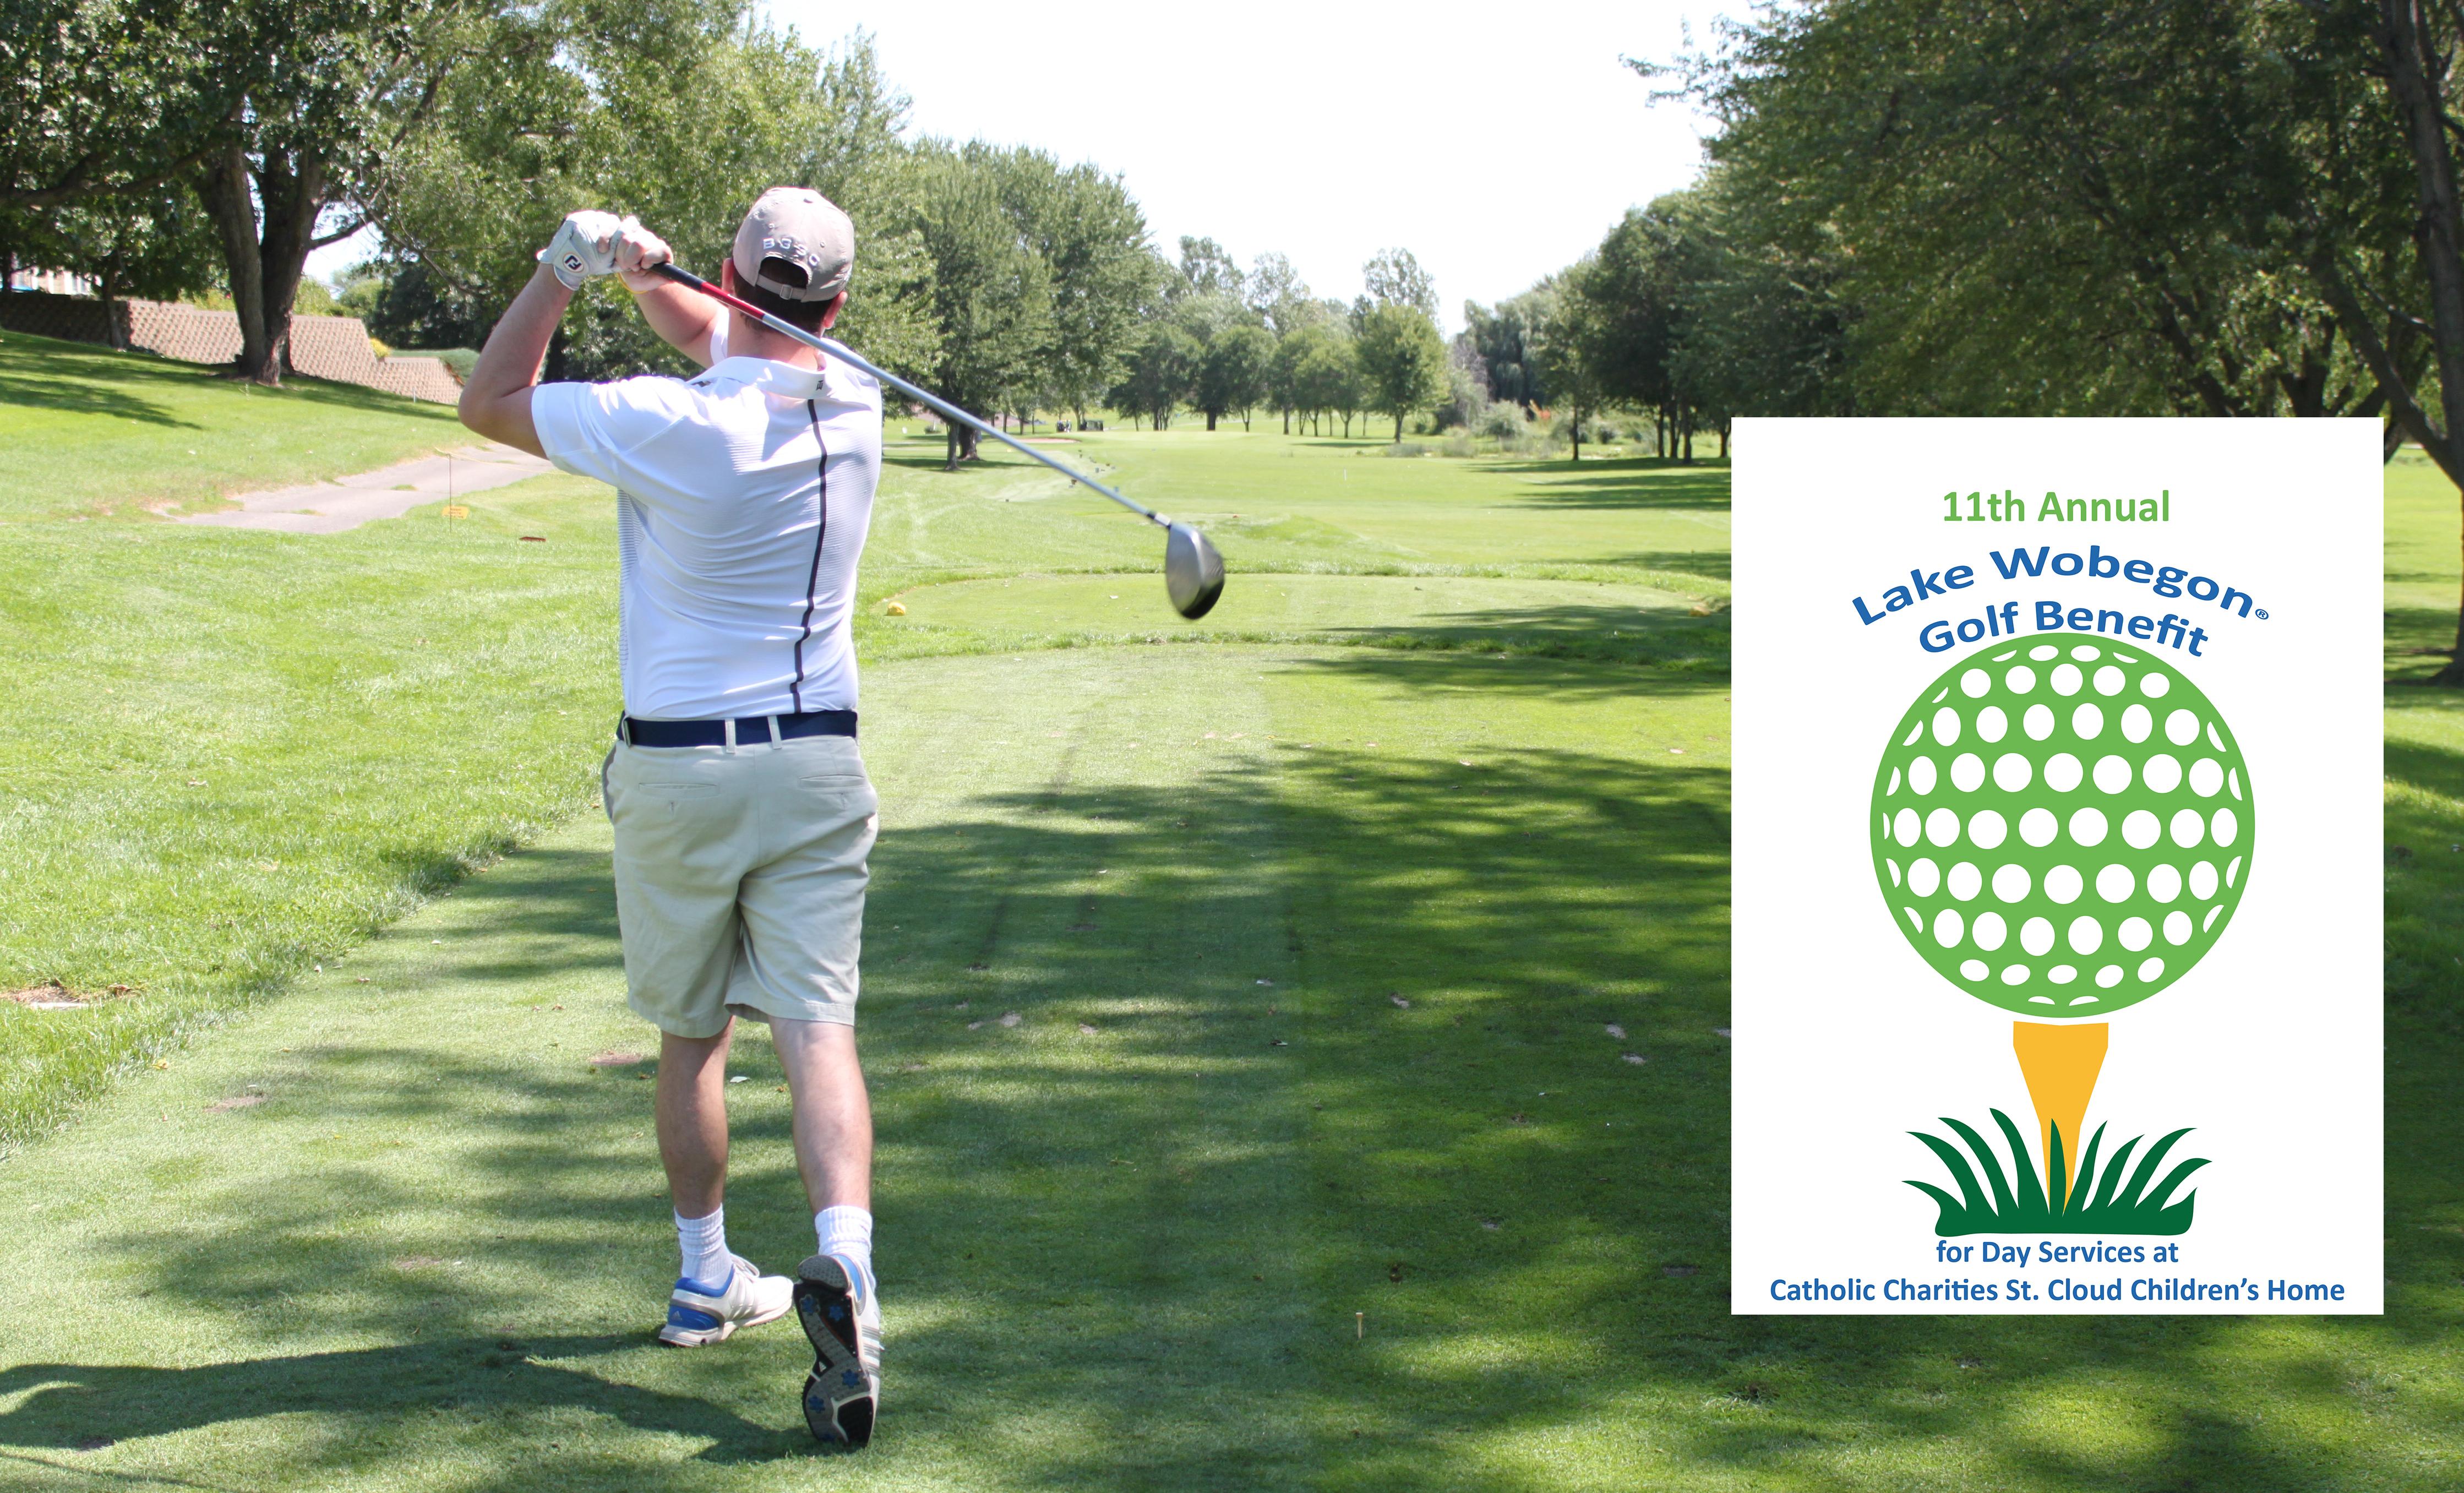 11th Annual Lake Wobegon Golf Benefit for Days Services at Catholic Charities St. Cloud Children's Home